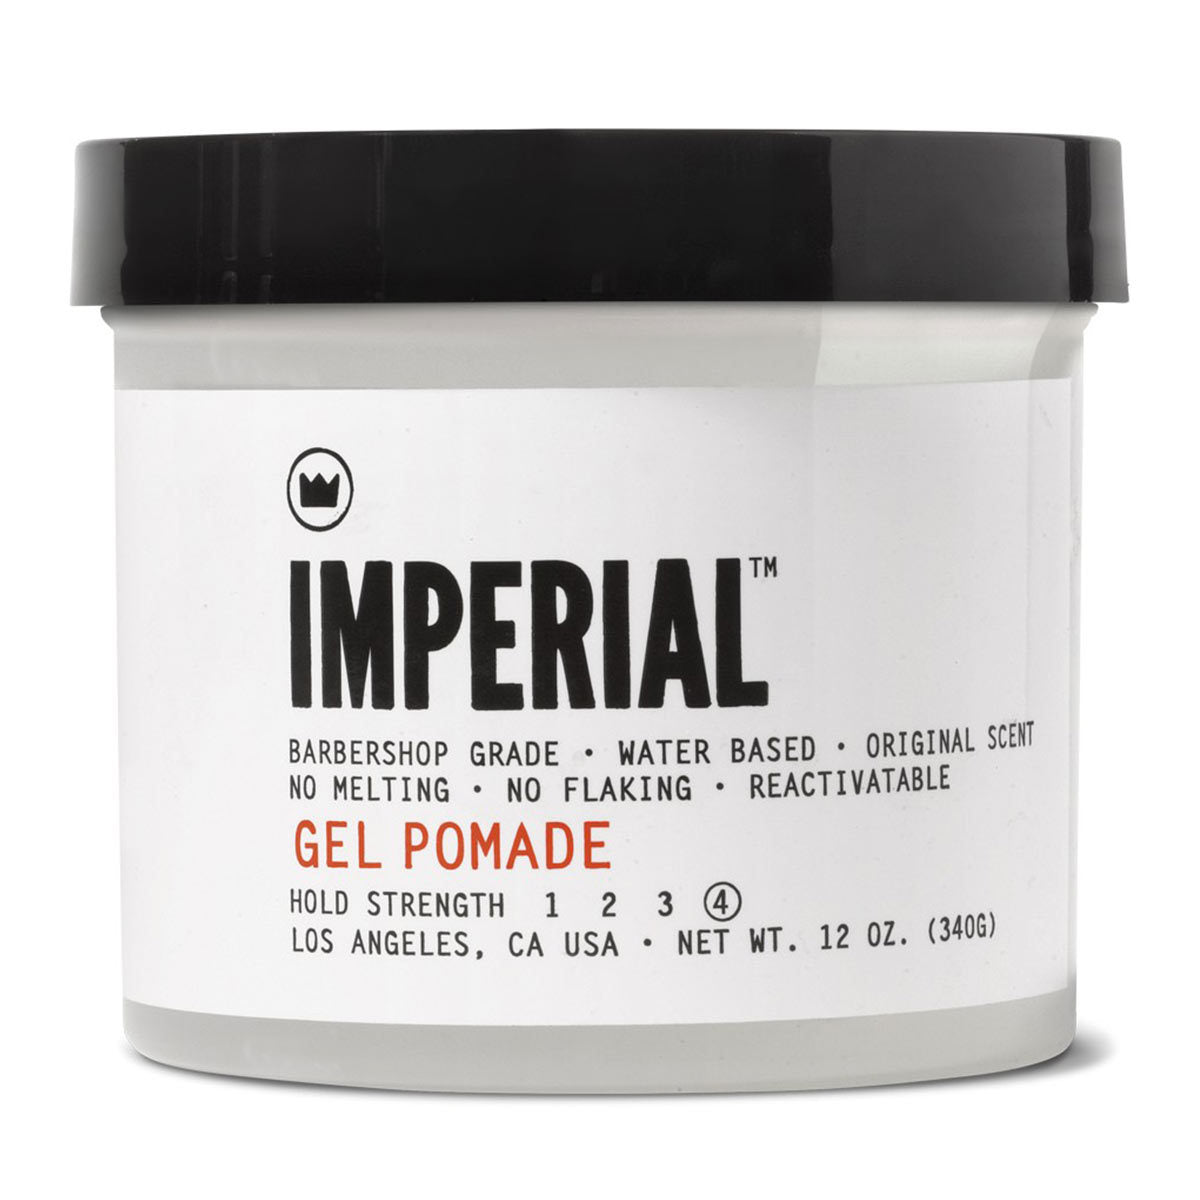 Primary image of Gel Pomade